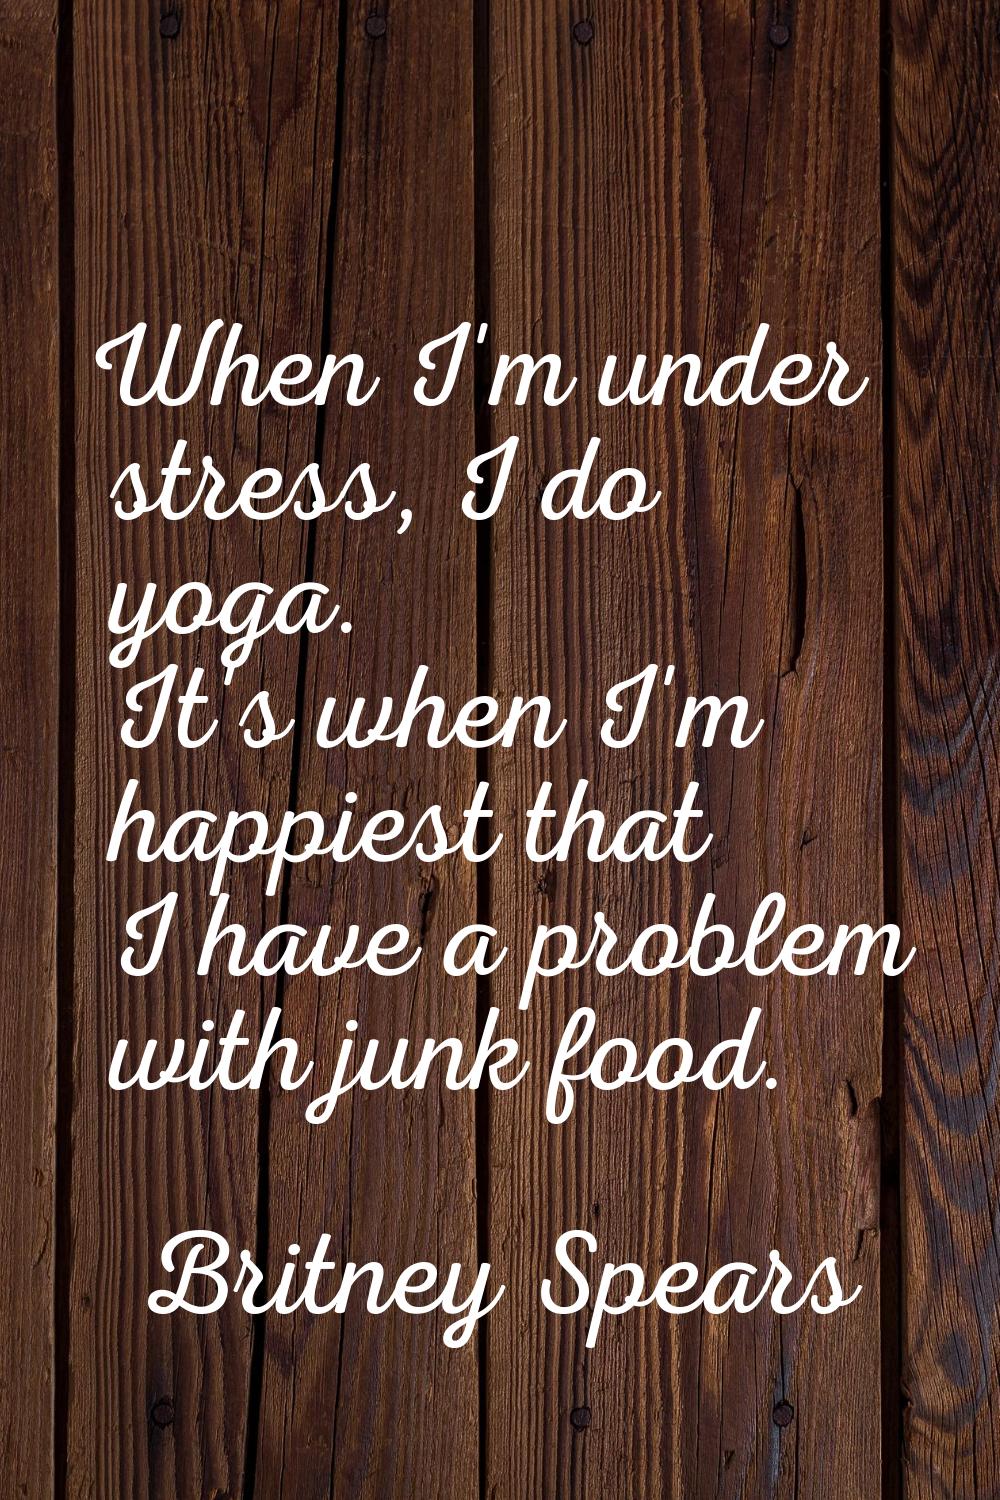 When I'm under stress, I do yoga. It's when I'm happiest that I have a problem with junk food.